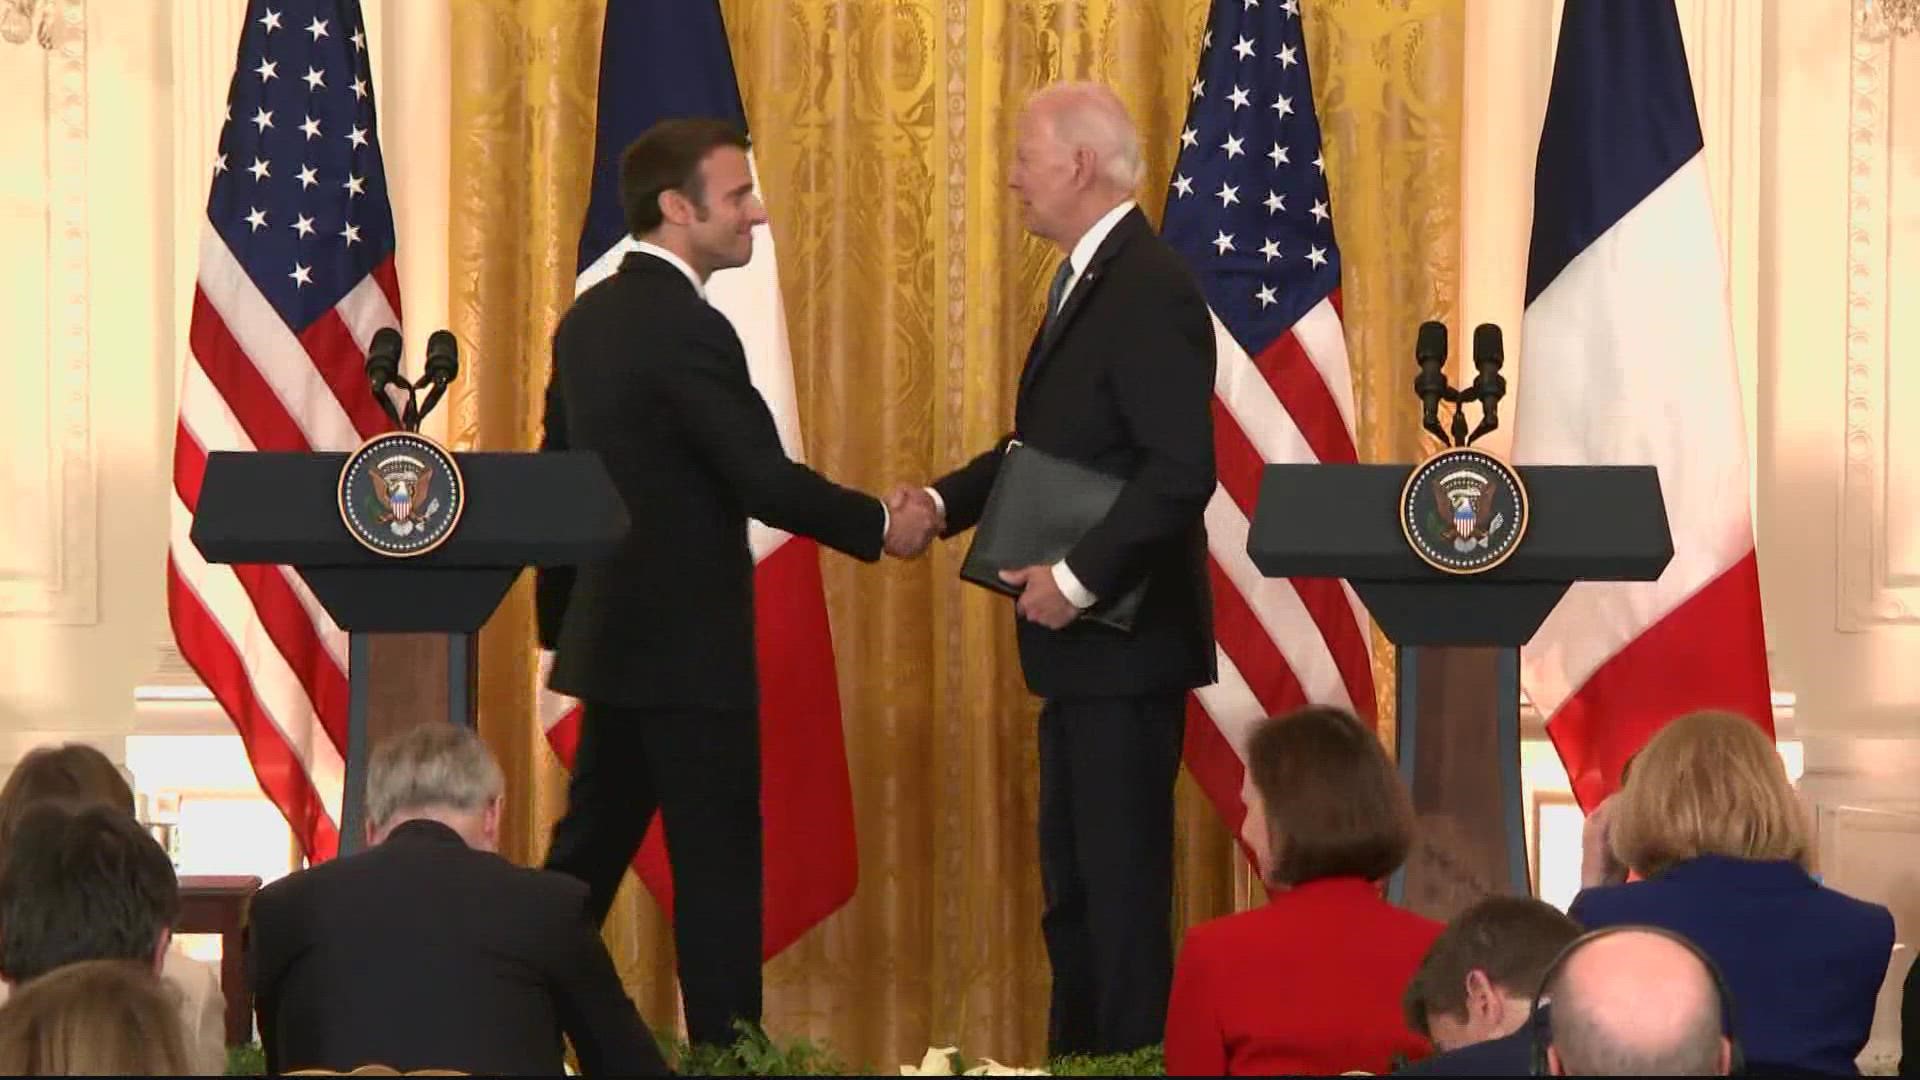 Biden is welcoming French President Emmanuel Macron to the White House for a visit that will conclude with the first state dinner